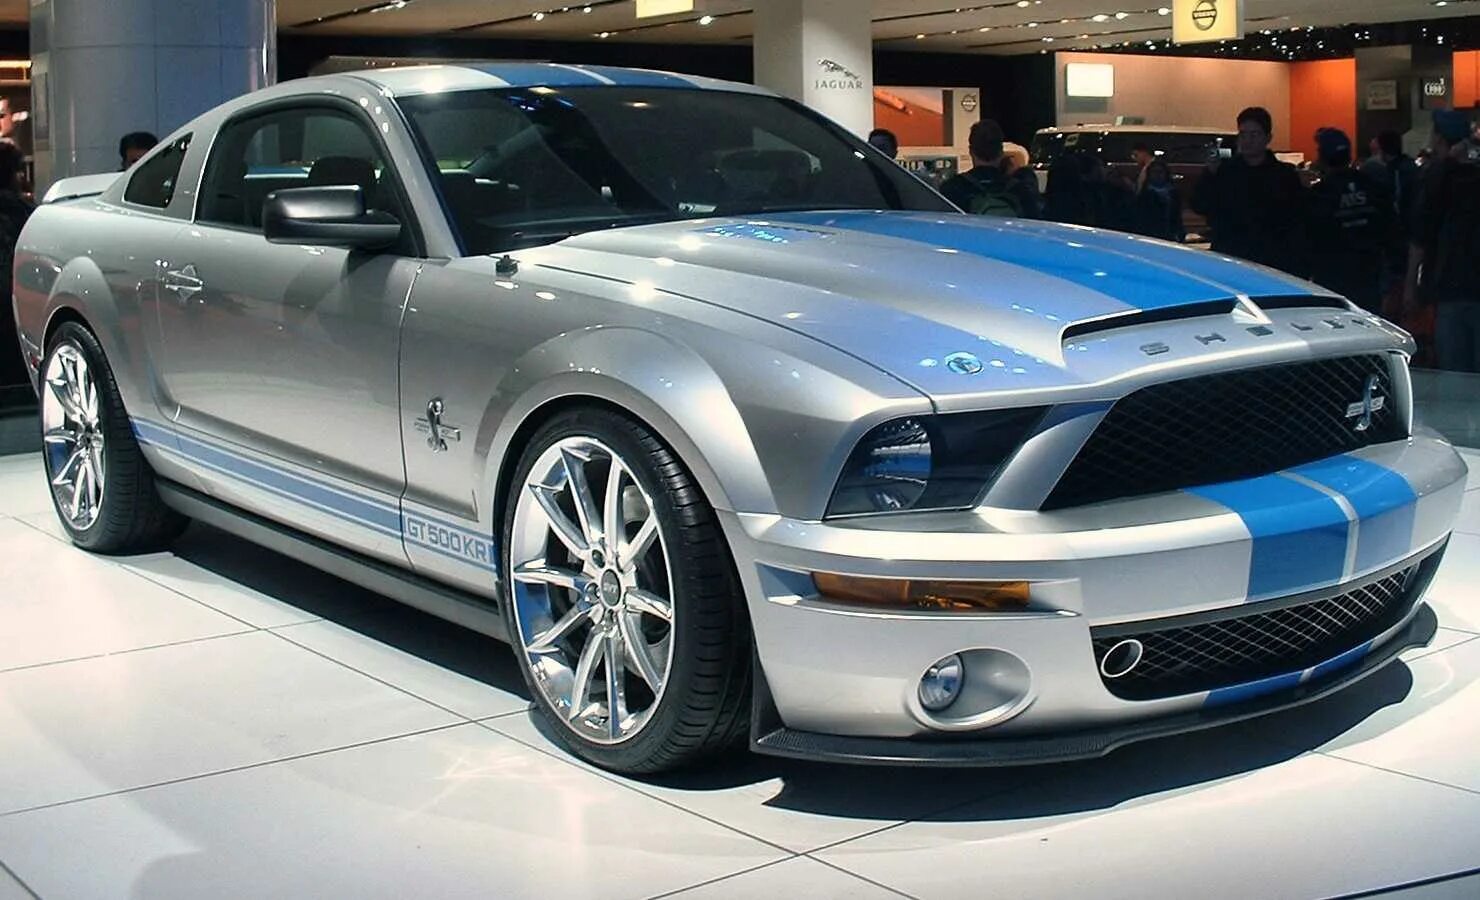 Ford Shelby gt500. Форт Мустанг Шэлби gt 500. Мустанг Шелби gt500. Форд Мустанг ГТ 500 Шелби. Mustang shelby gt